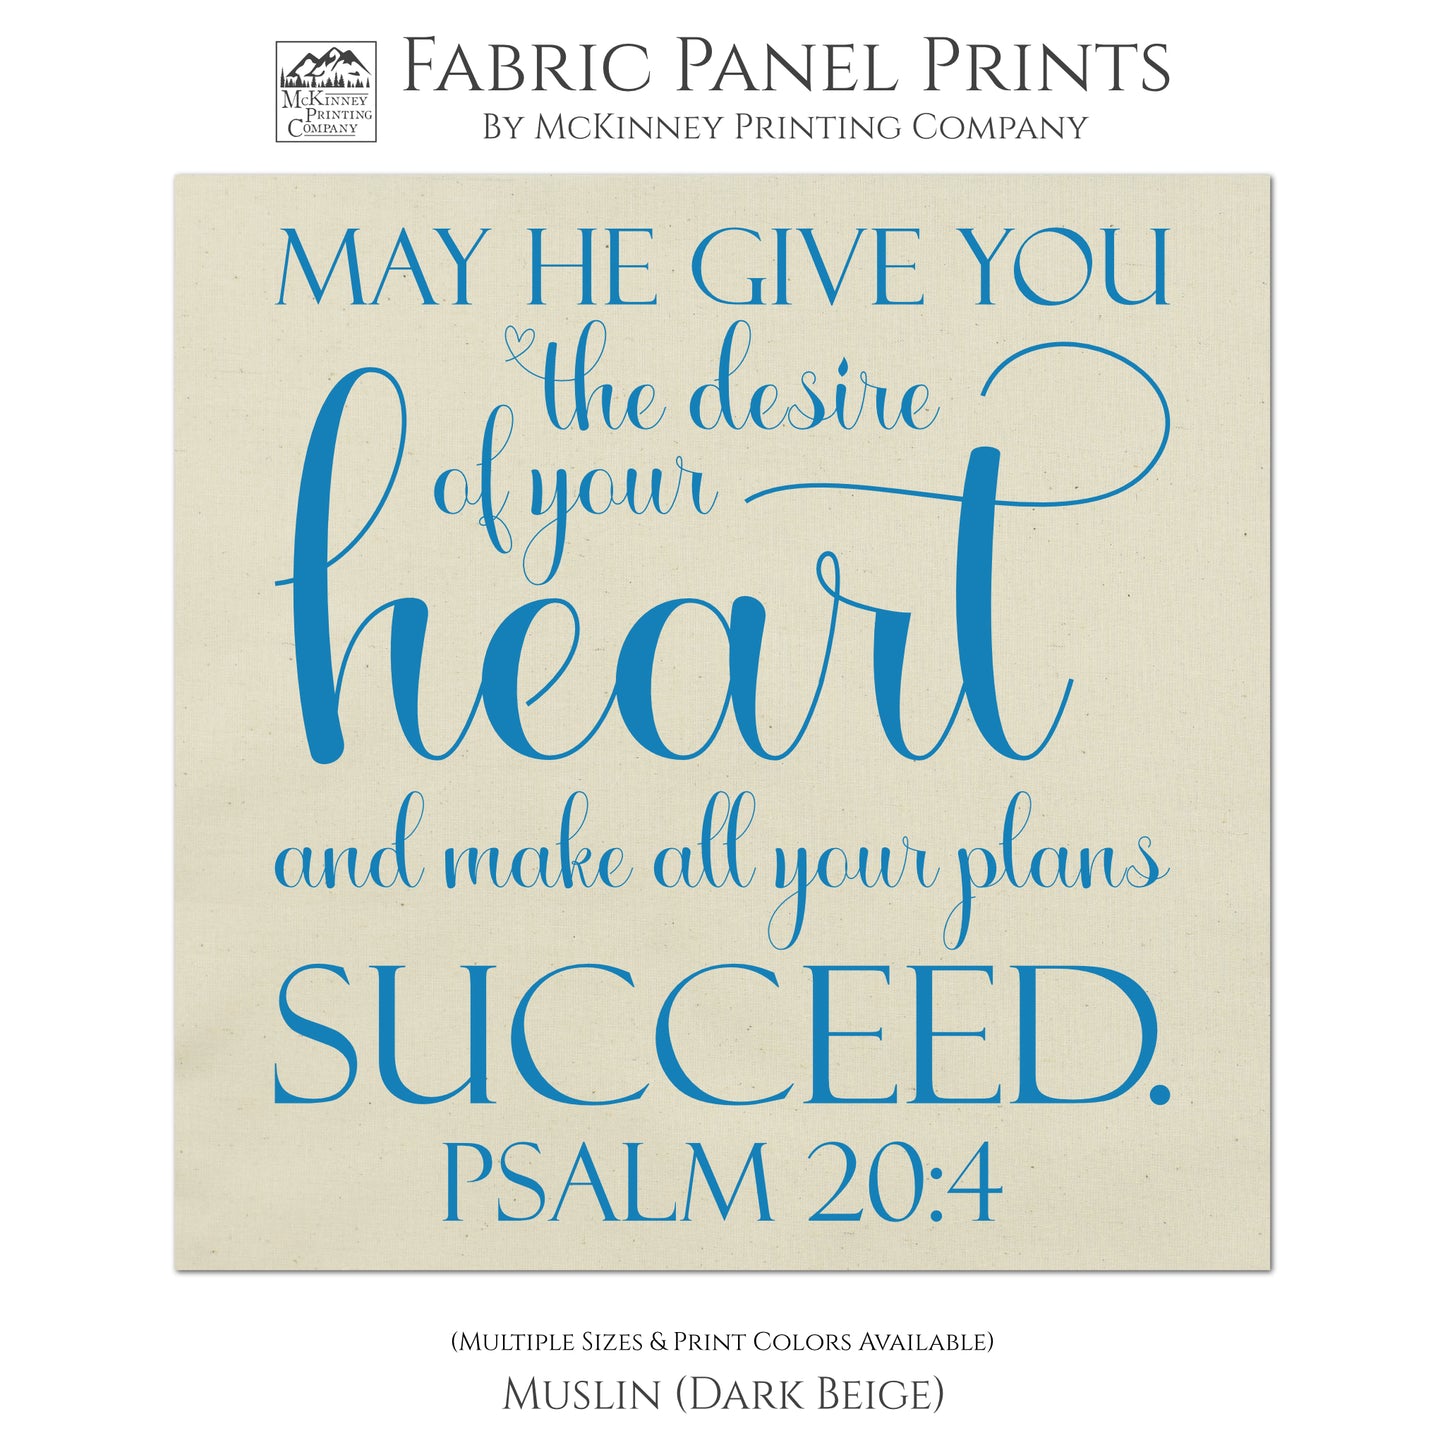 May He give you the desire of your heart and make all your plans succeed - Psalm 20:4 - Religious Fabric, Wall Hanging, Quilt Block, Sewing Craft, Pillow - Muslin